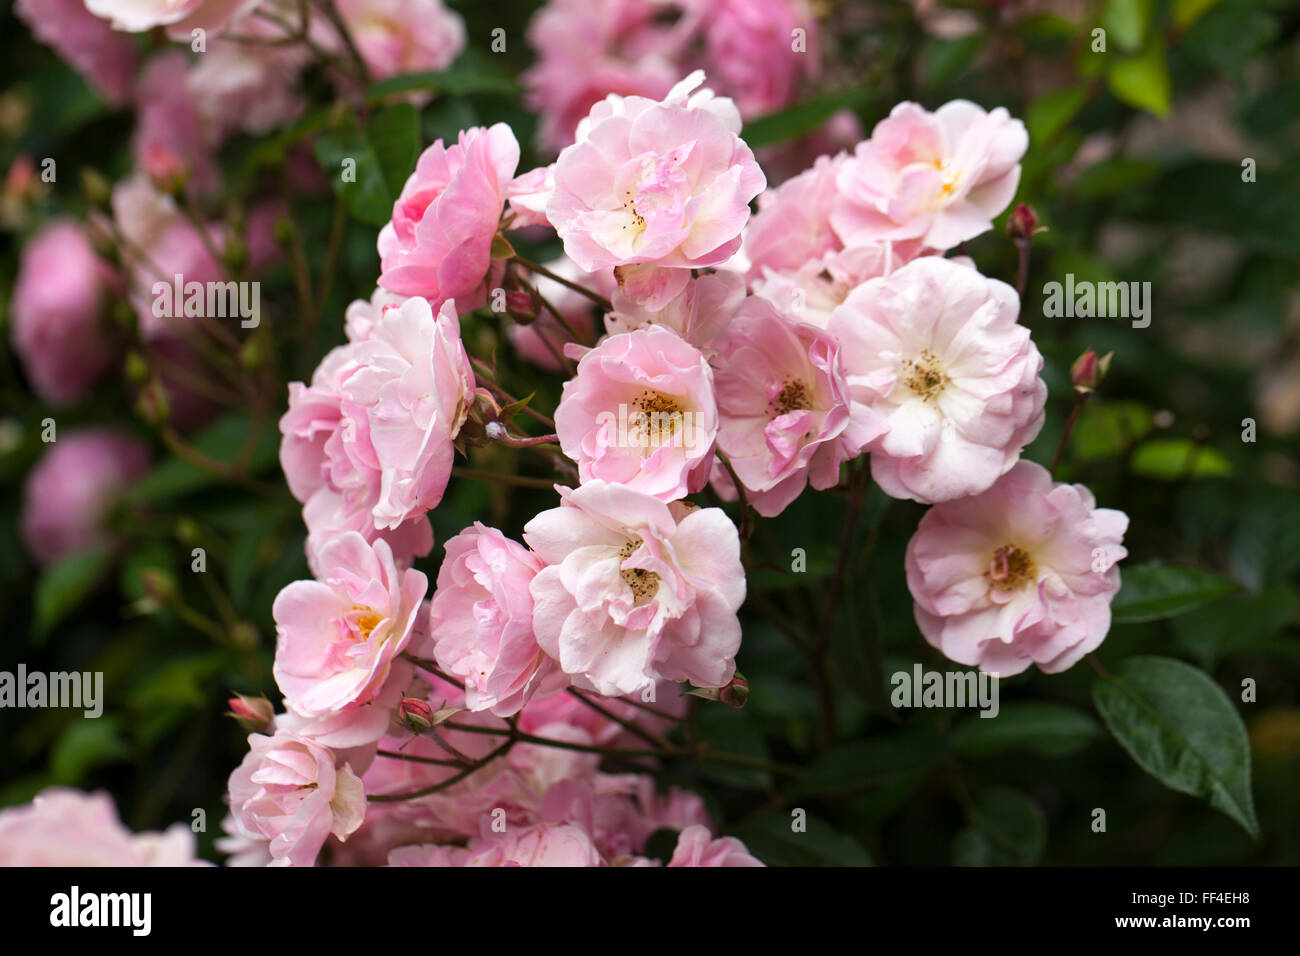 Close up of Pink Nathalie Nypels Rose flowering in an English garden, UK Stock Photo